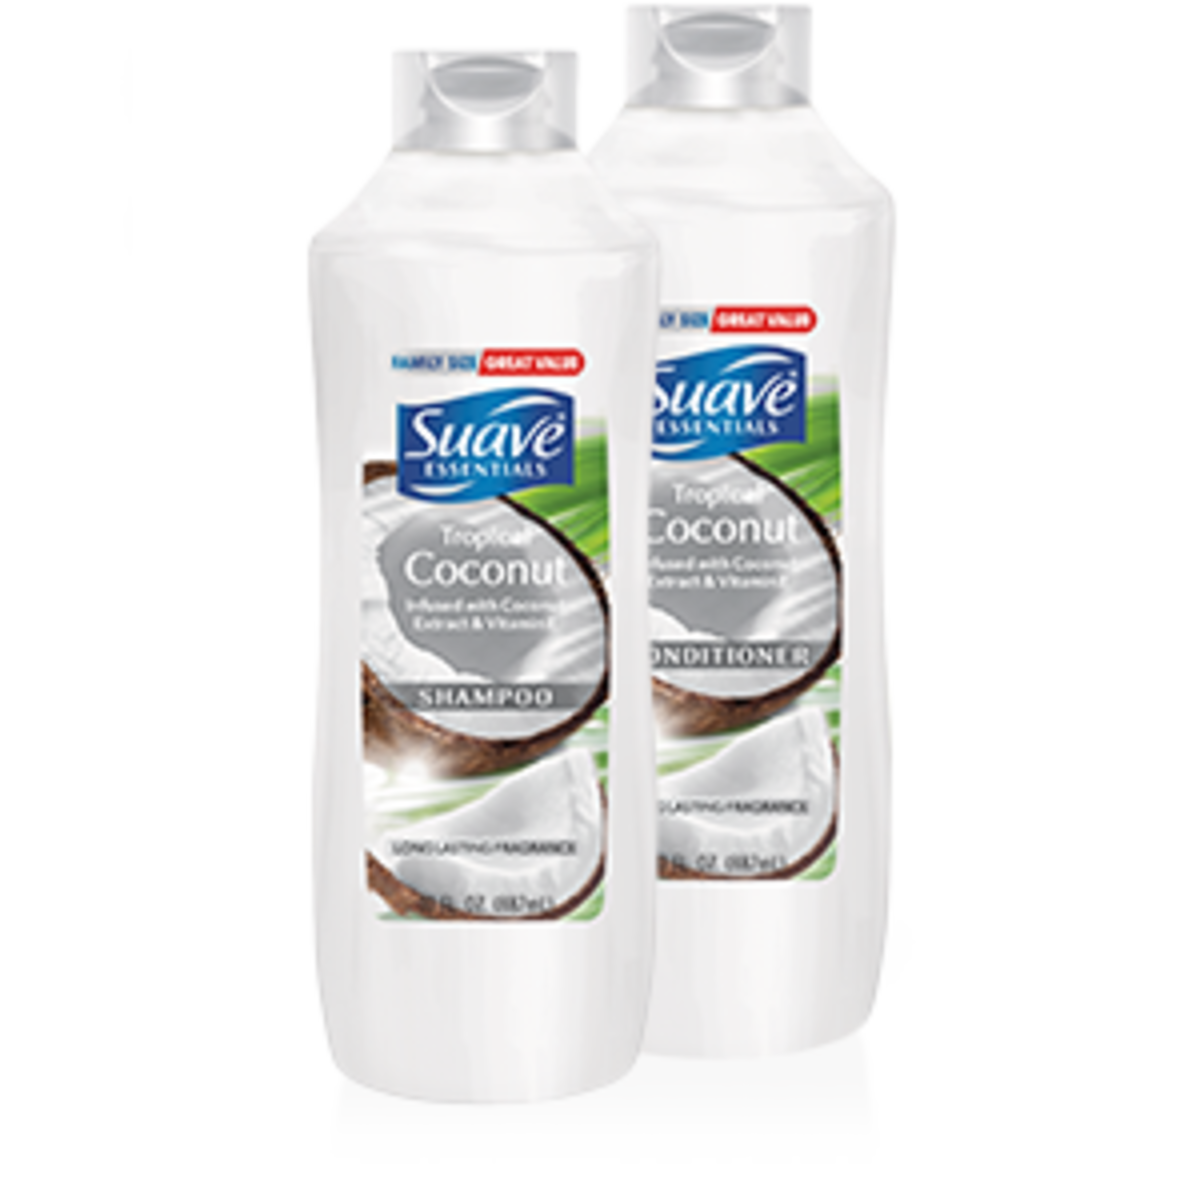 I recommend using the Suave brand's "Tropical Coconut" shampoo and conditioner. 